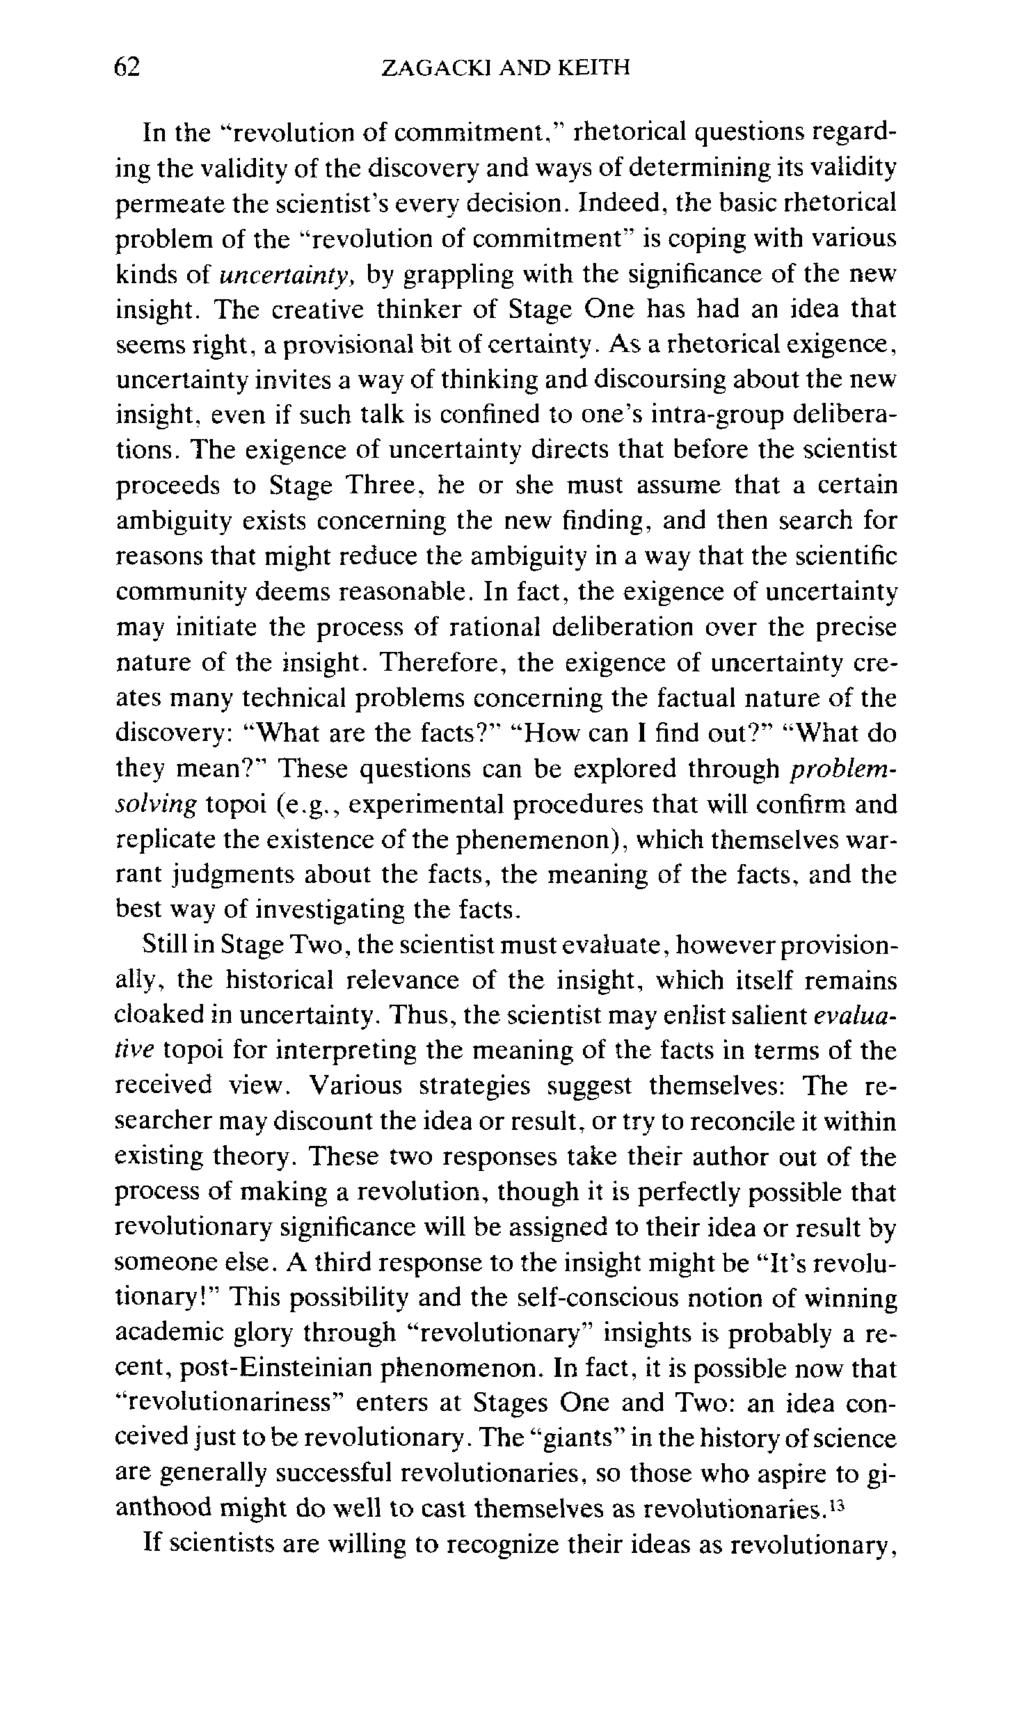 62 ZAGACKI AND KEITH In the "revolution of commitment." rhetorical questions regarding the validity of the discovery and ways of determining its validity permeate the scientist's every decision.